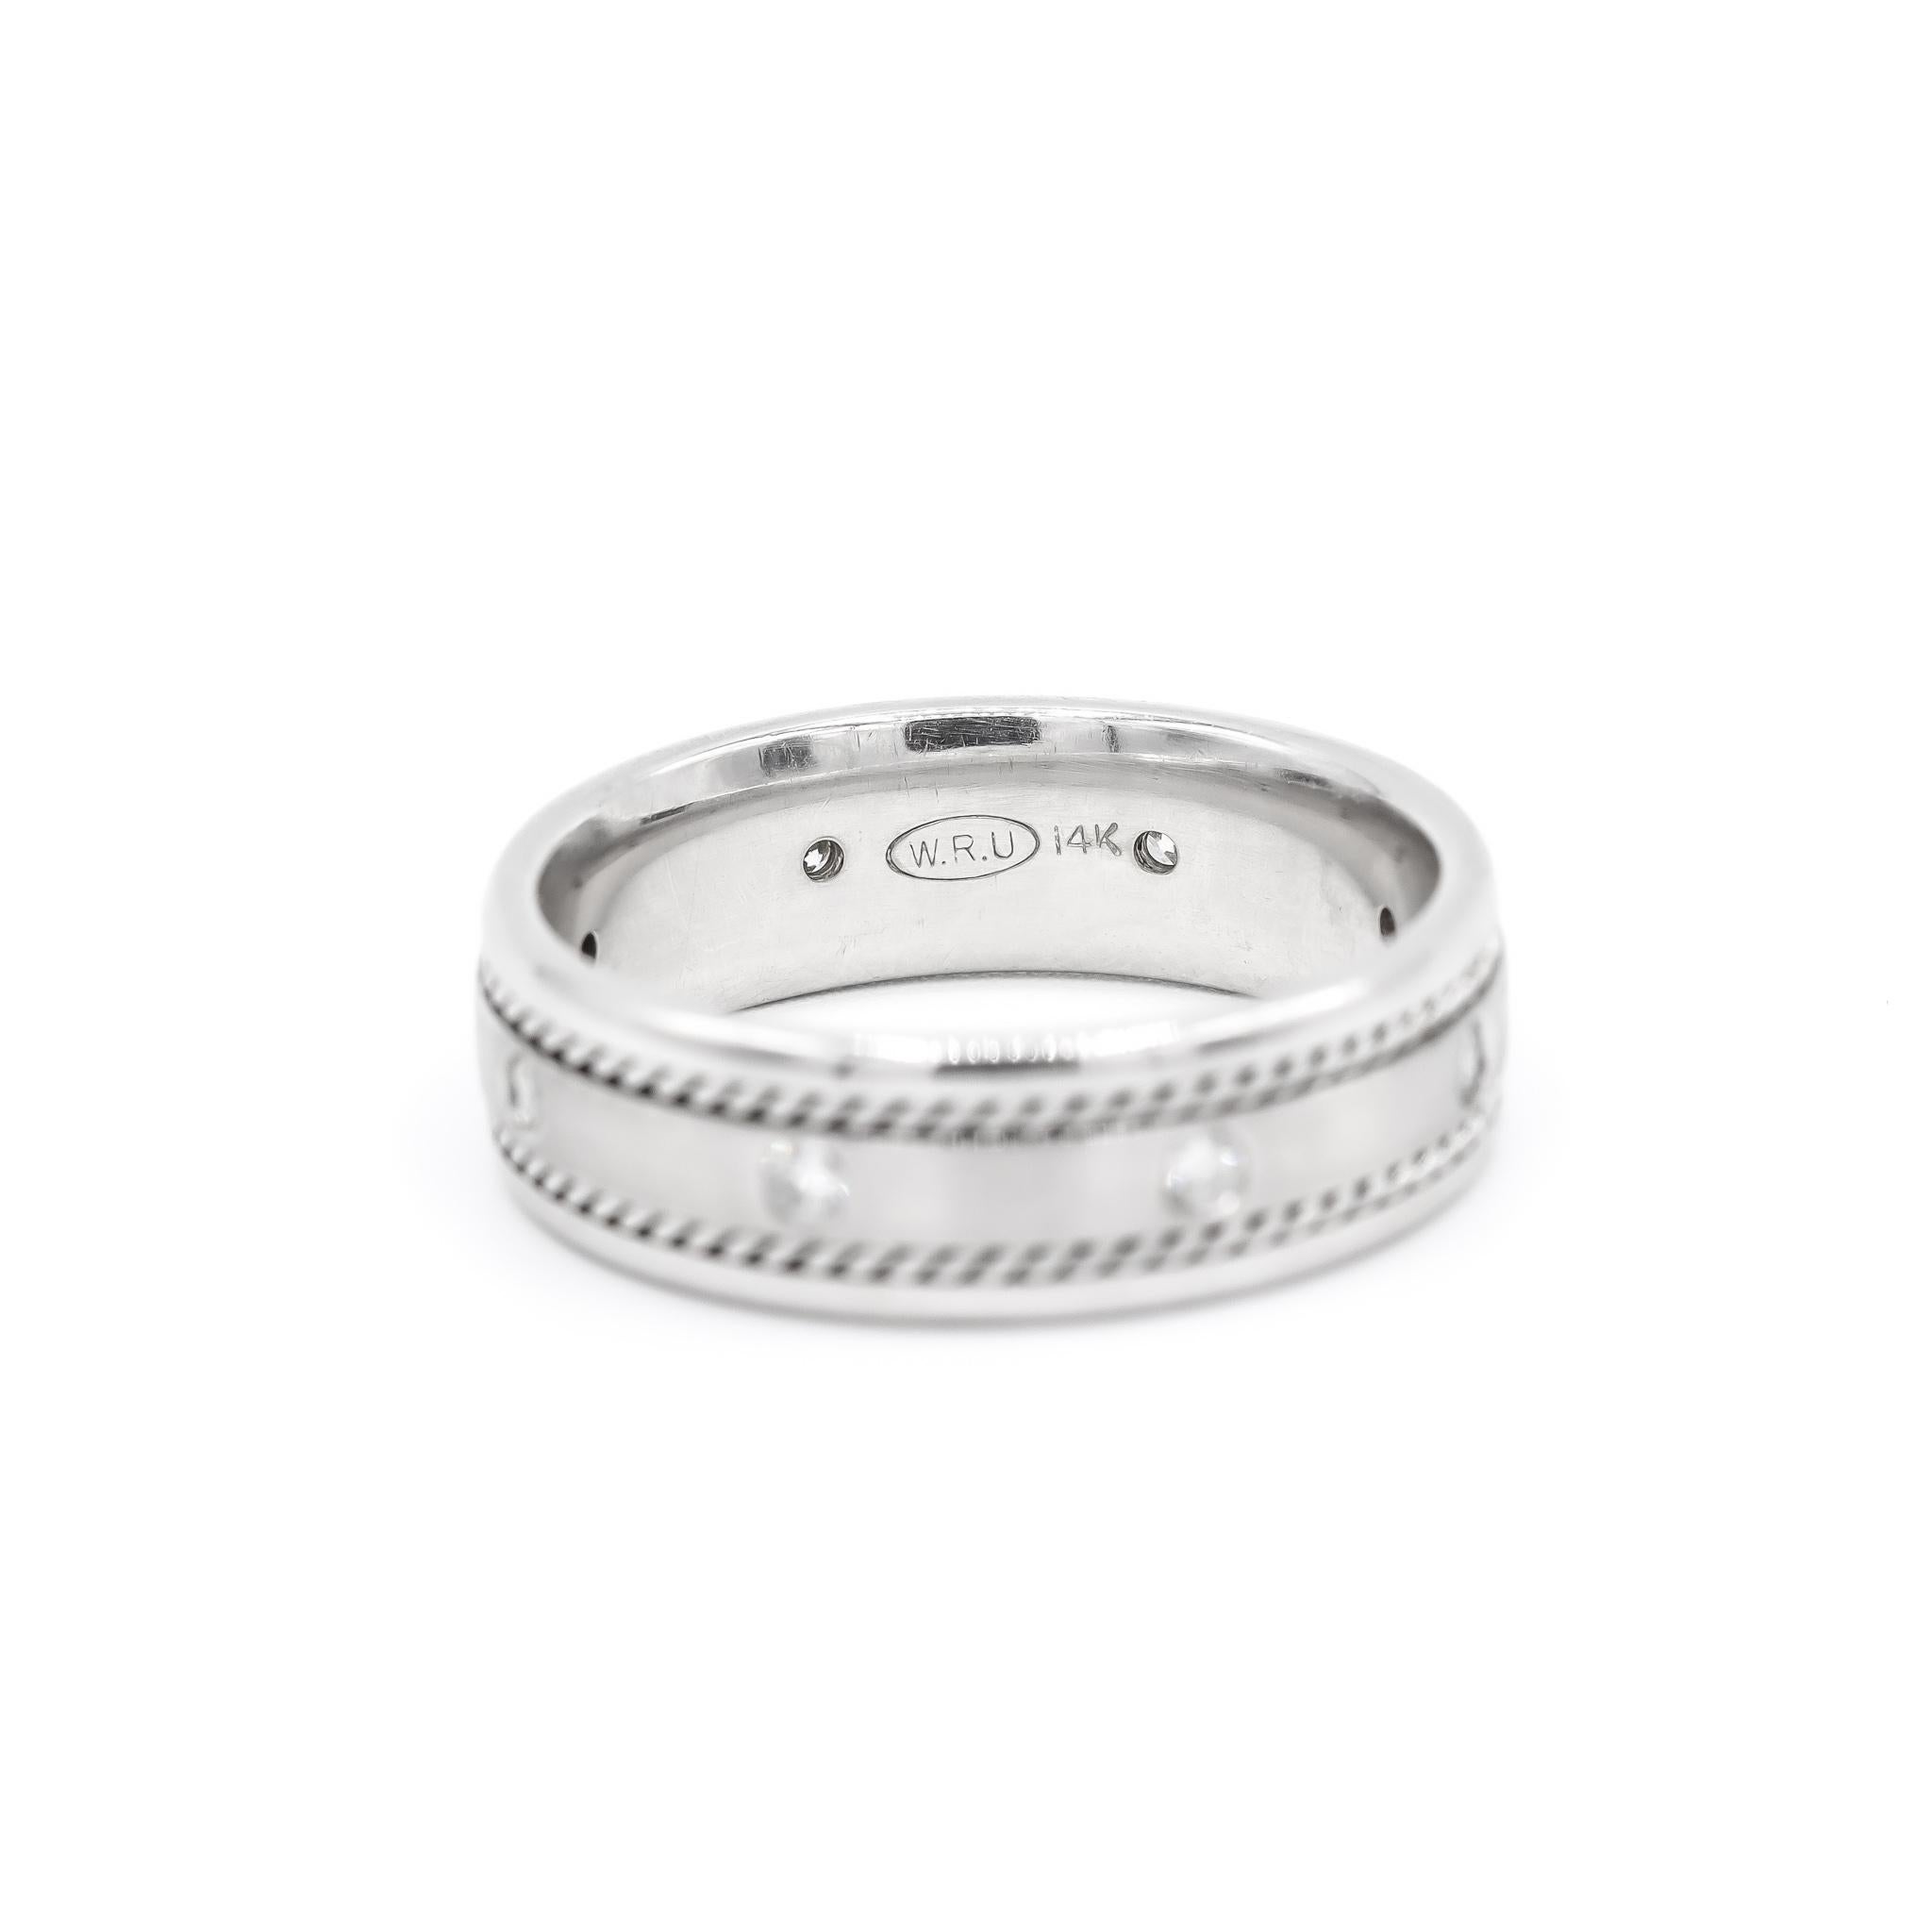 One man's custom made brushed & polished rhodium plated 14K white gold nine-across, diamond anniversary, wedding band with a soft-square shank. The band is a size 10. The band weighs a total of 9.00 grams. Engraved with 